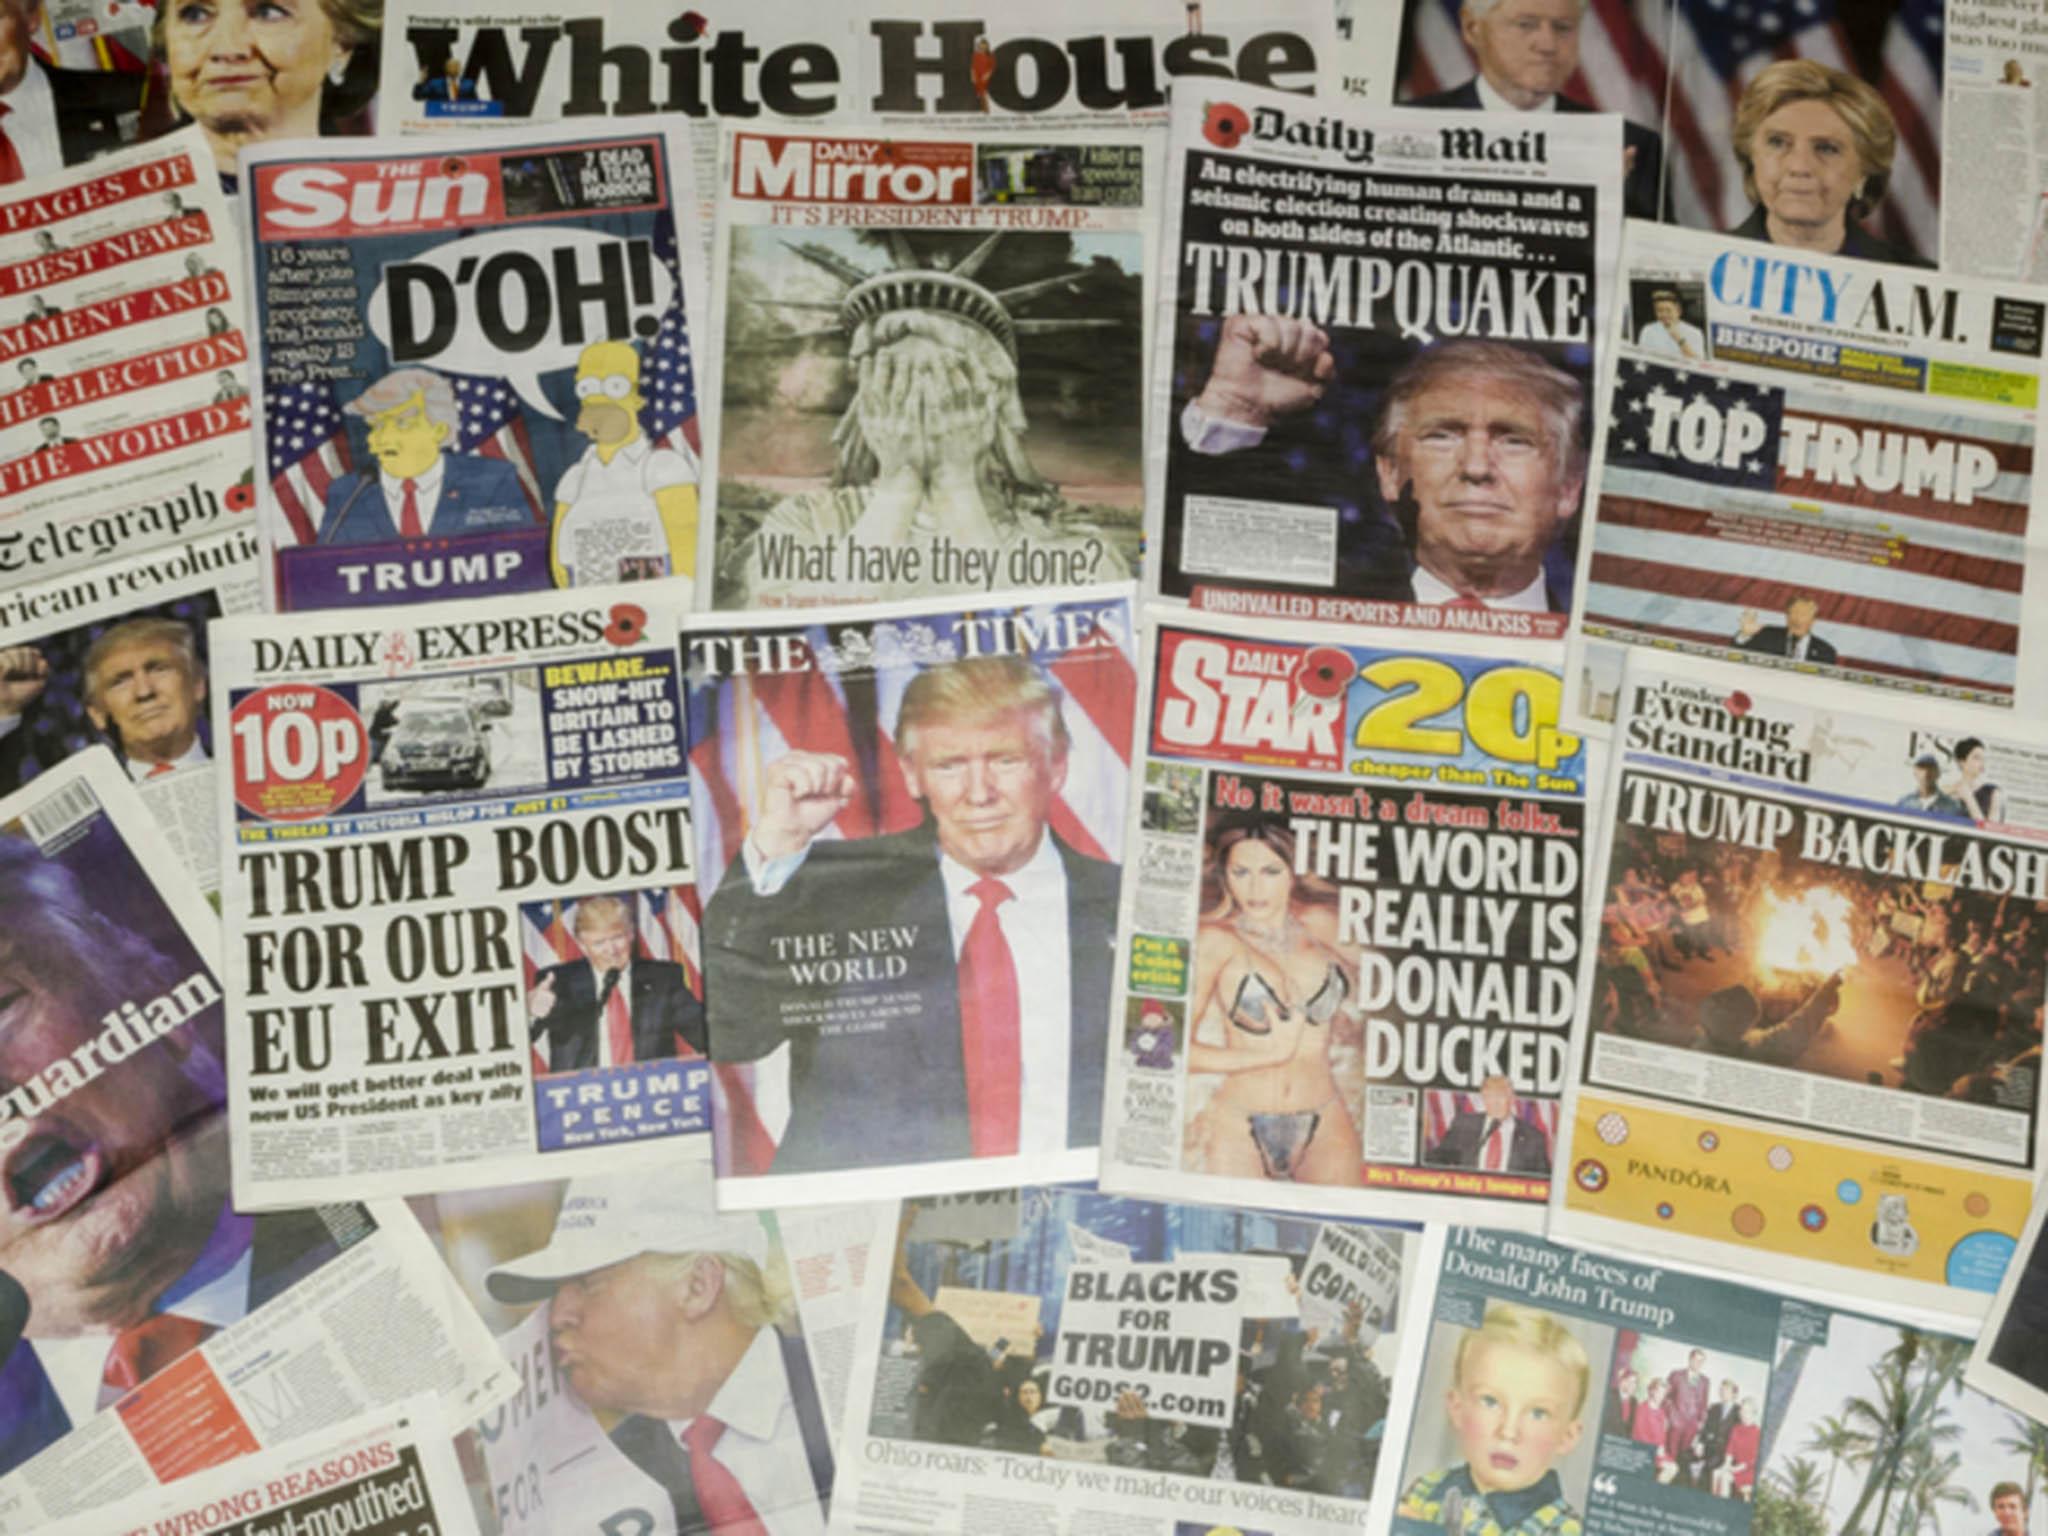 2017 is set to be a decisive year for printed newspapers